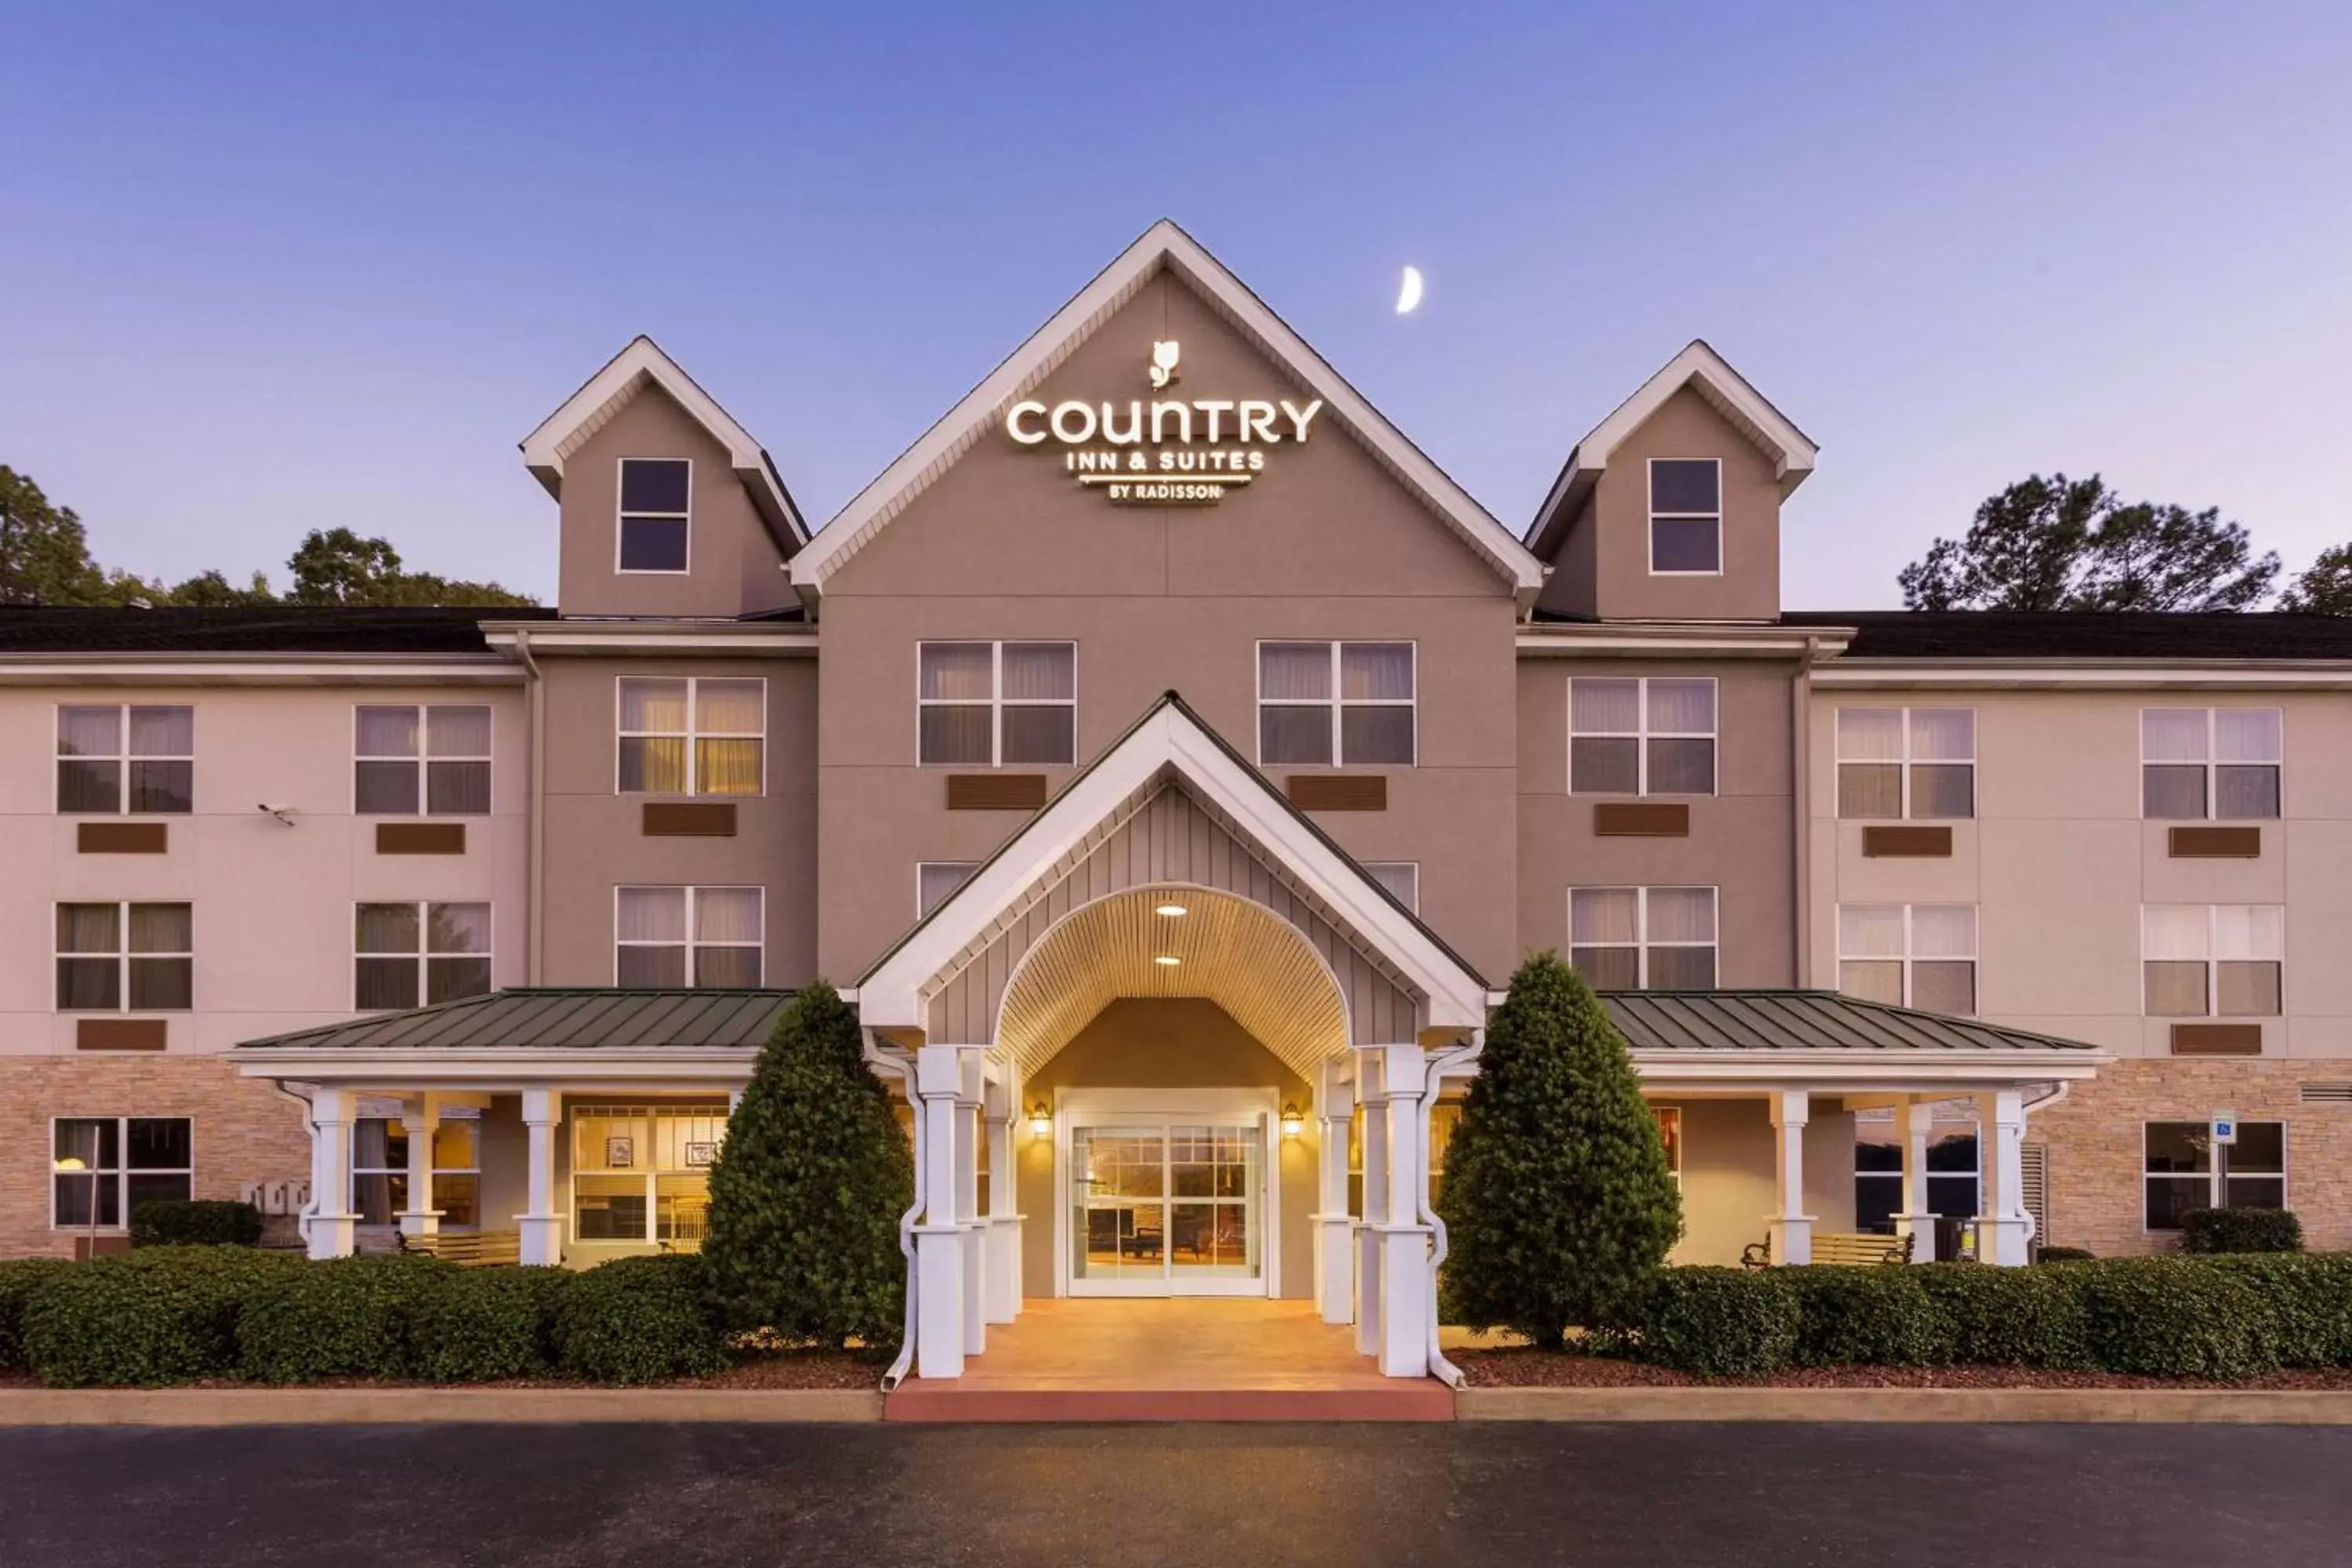 Property building in Country Inn & Suites by Radisson, Tuscaloosa, AL